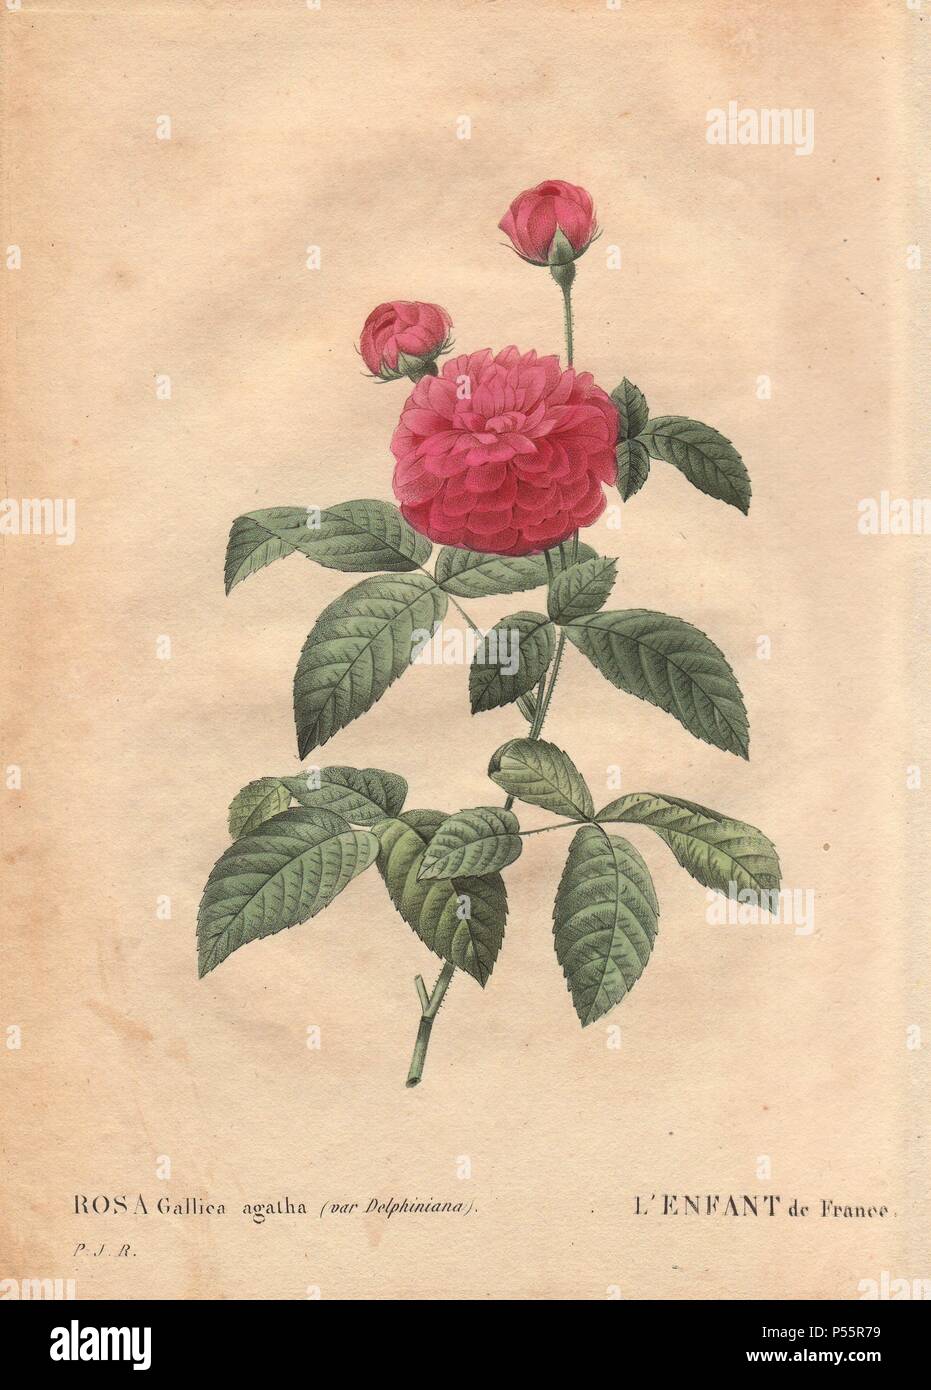 Child of France rose (Rosa gallica agatha var. delphiniana), with a large scarlet rose in bloom and two buds ascending.. . Cultivated by Monsieur Du Pont, circa 1802, known since the reign of Louis XV (1710-1774) and named 'Enfant de France' in honor of the Dauphin.. . Hand-colored, octavo-size stipple copperplate engraving from Pierre Joseph Redoute's 'Les Roses' 1828. Stock Photo